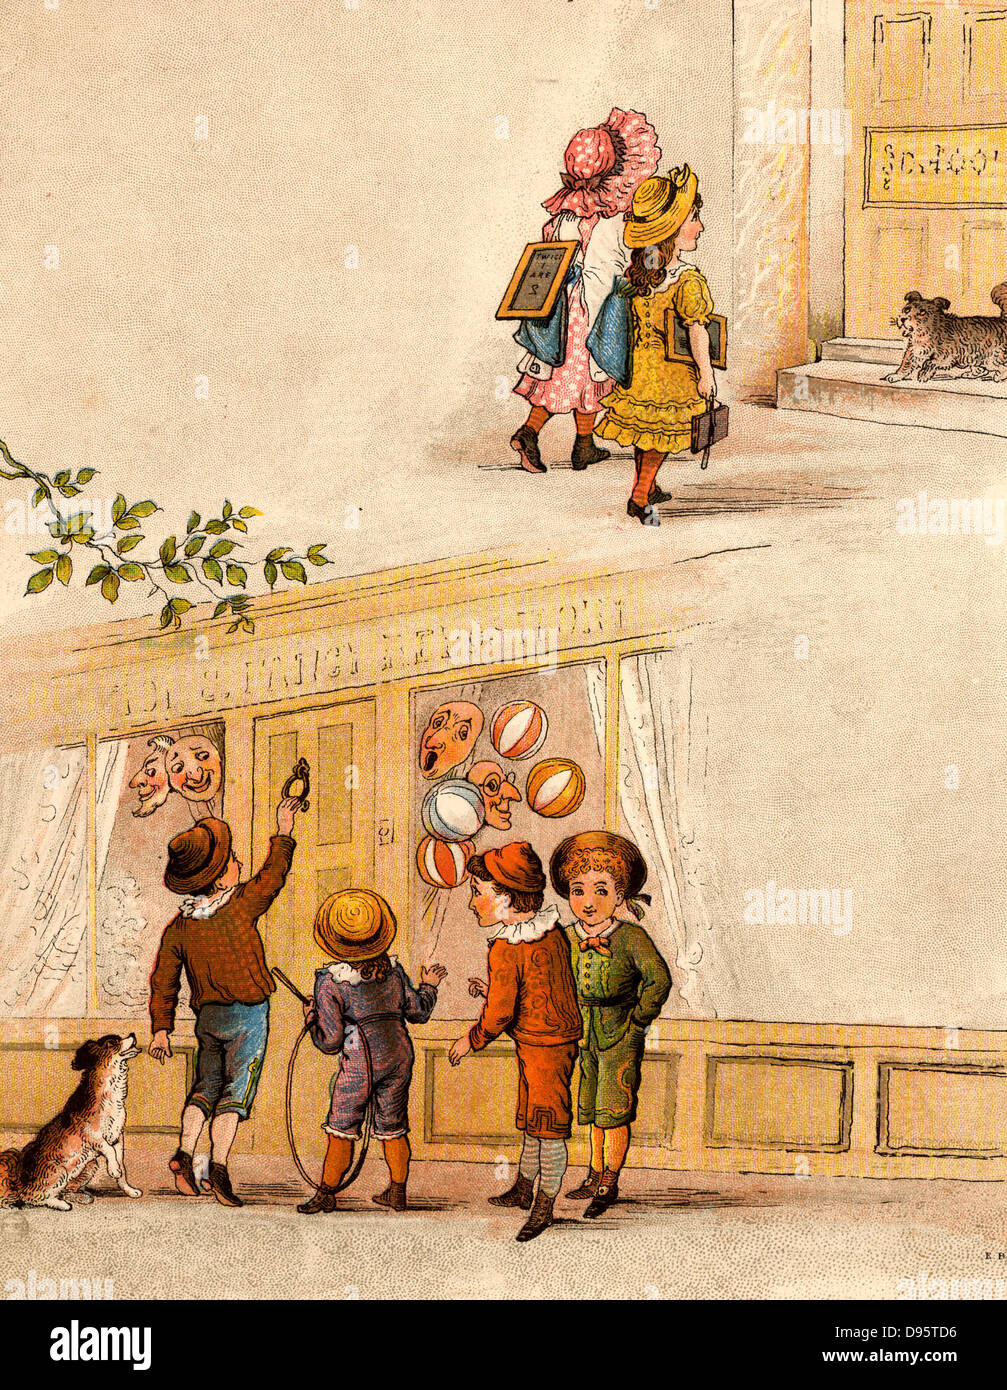 Twice Six are Twelve,/Leave dunces to themselves,/Naughty chaps, to paint their caps./Twice six are ?'.  From 'The Merry Multiplication Table' by Irving Montague (London c1870). Chromolithograph. Stock Photo